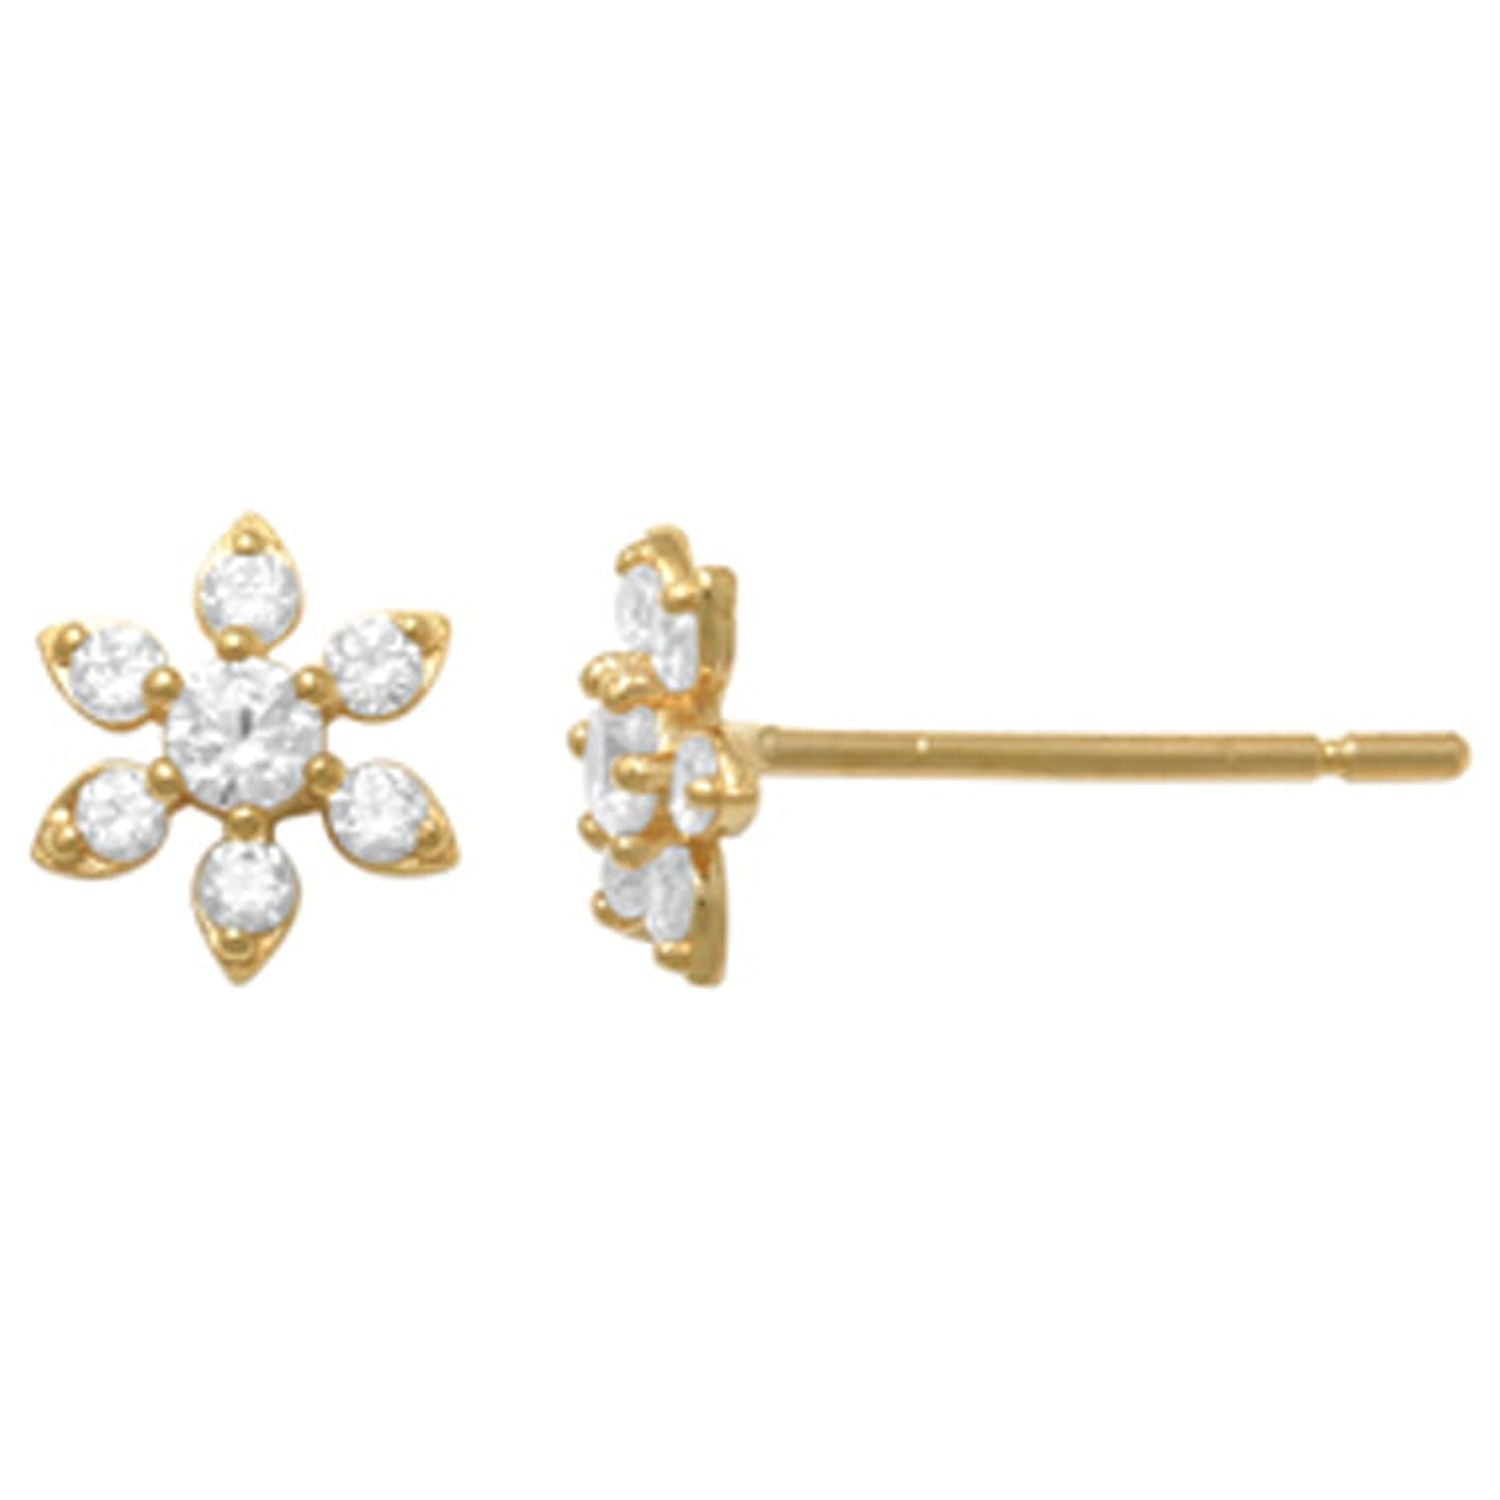 Snowflake Stud Earrings made of Solid Gold - Tales In Gold